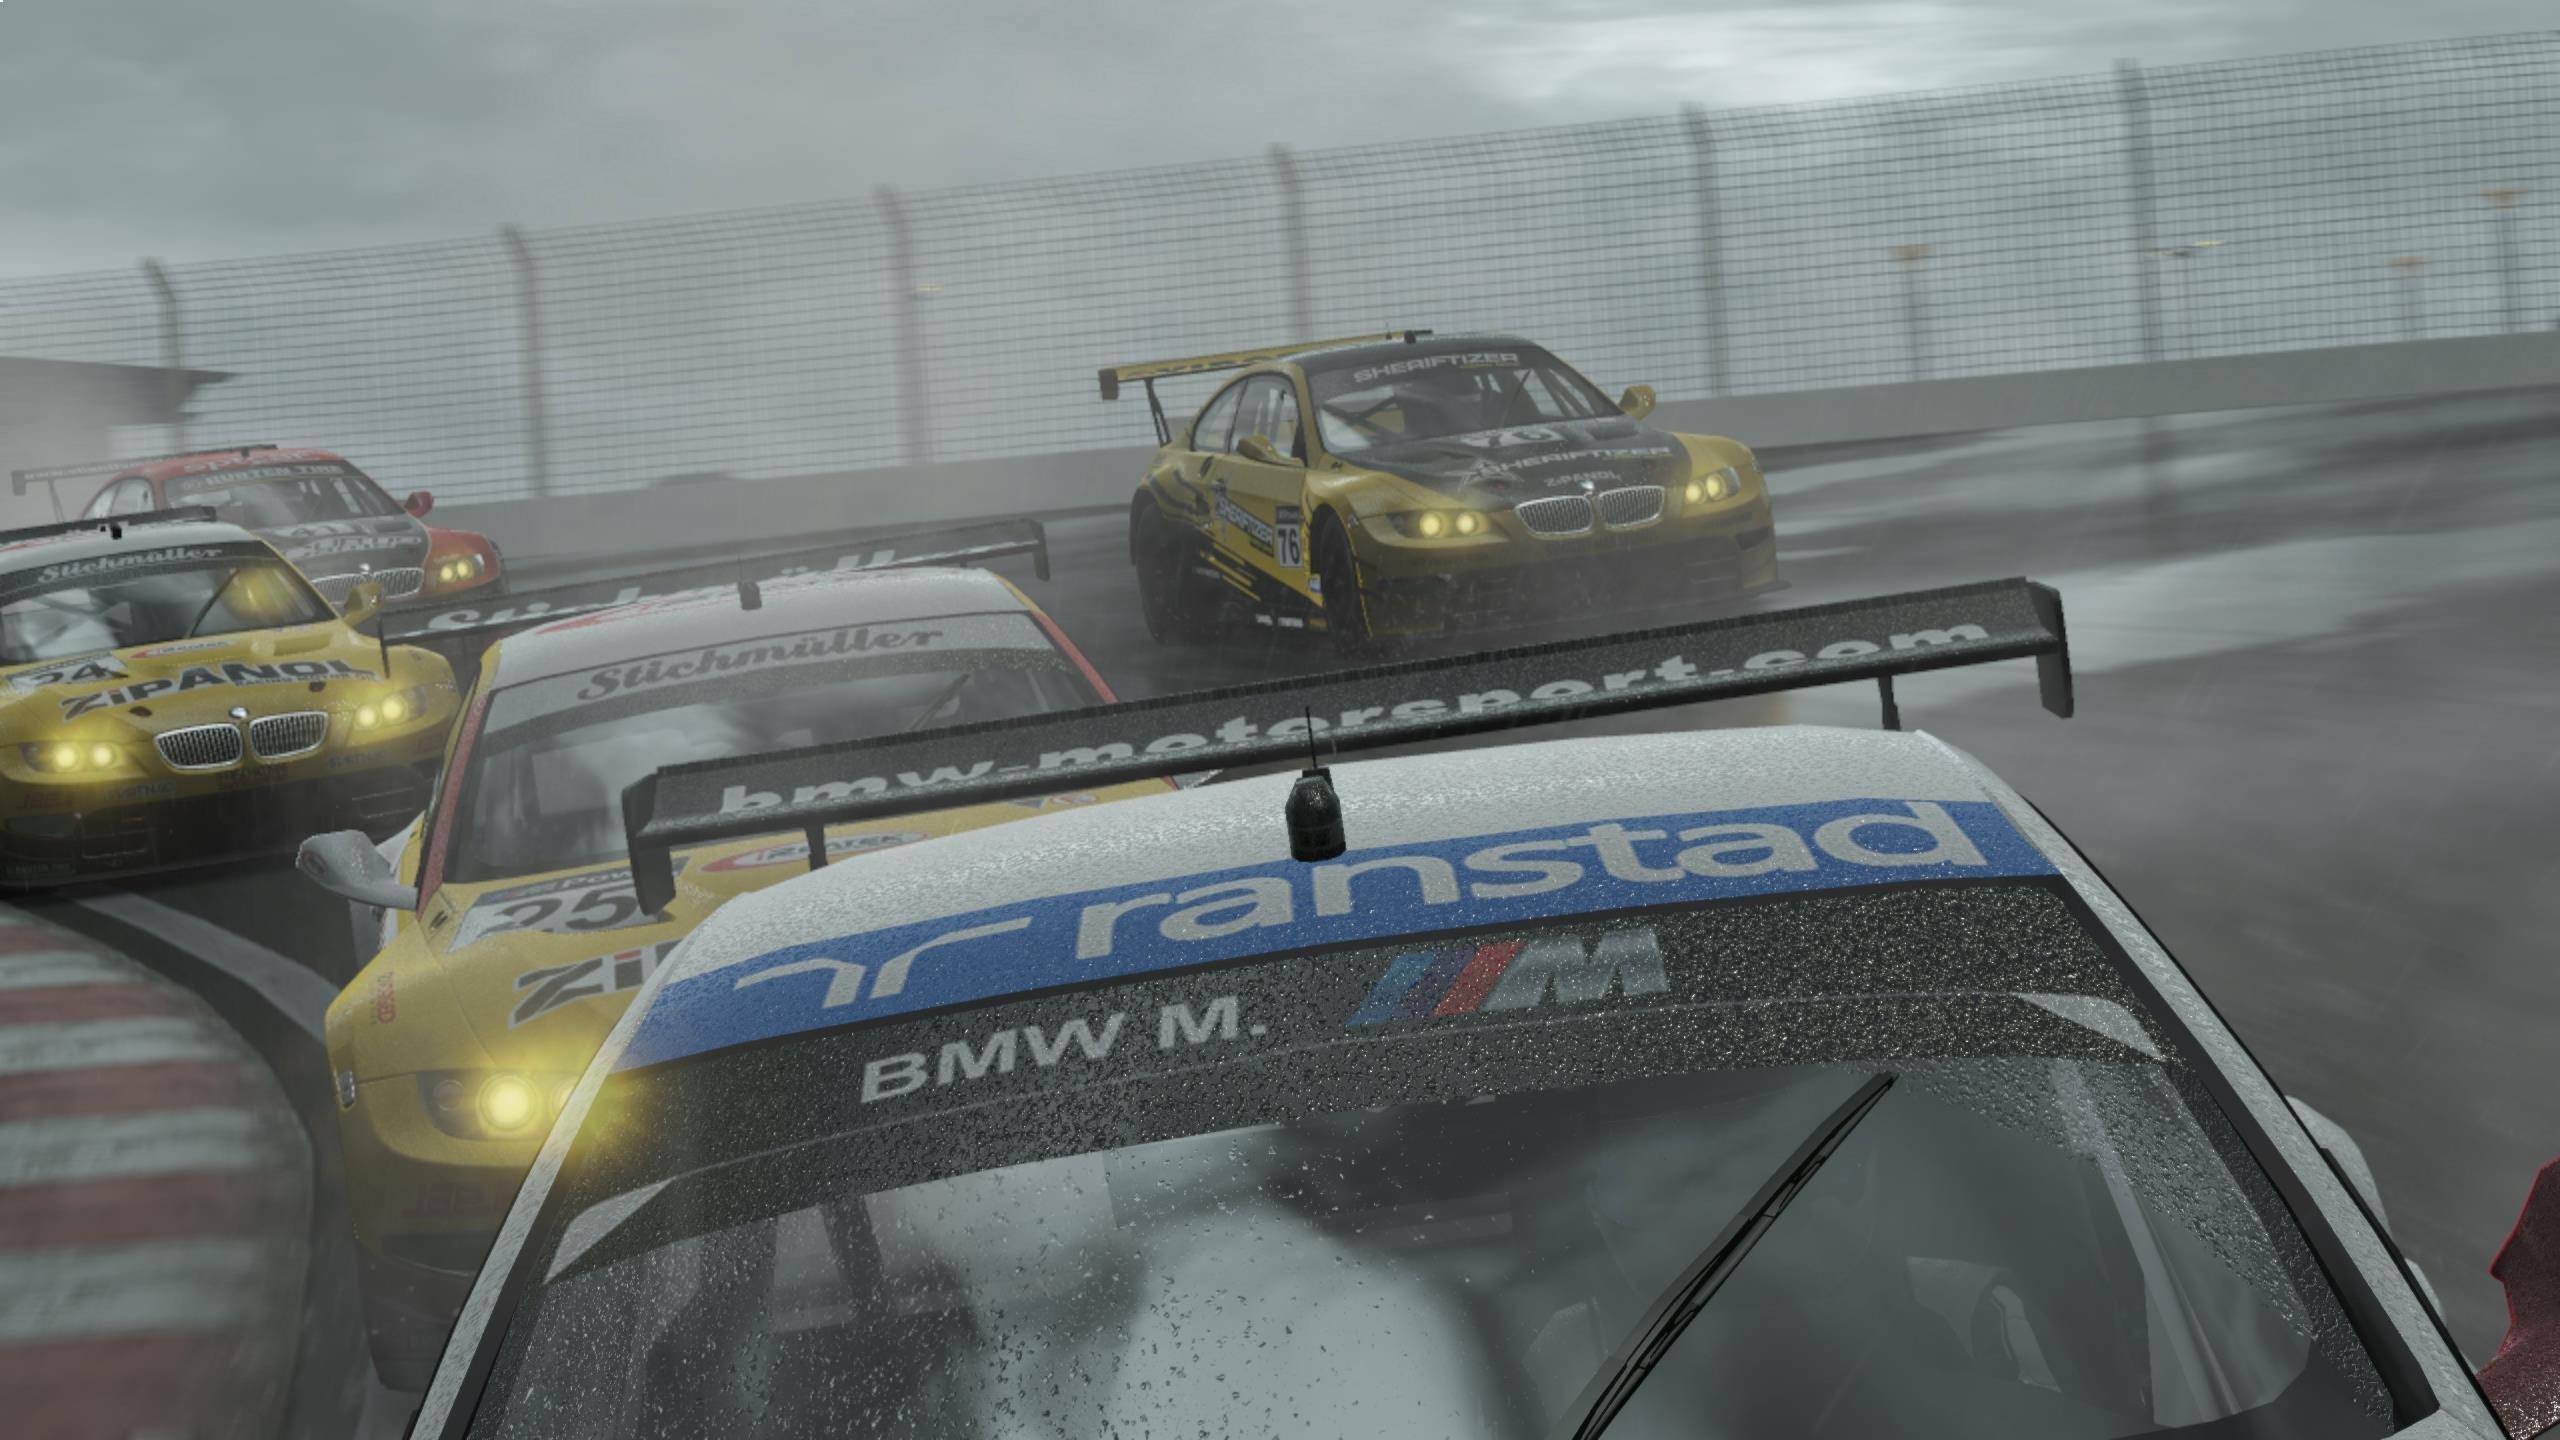 project cars xbox 360